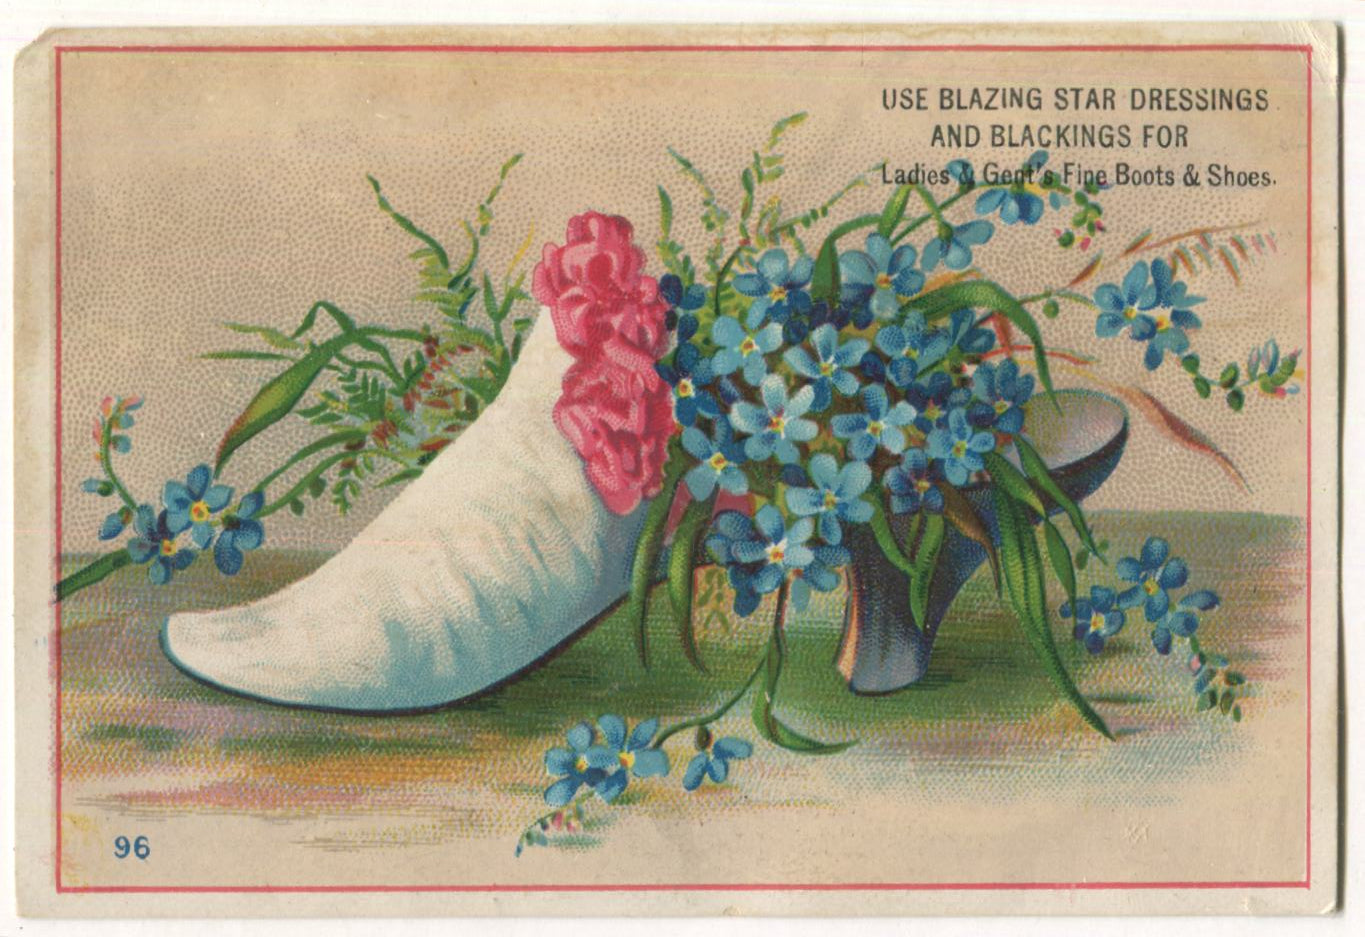 Blazing Star Dressings and Blackings for Boots and Shoes Antique Trade Card